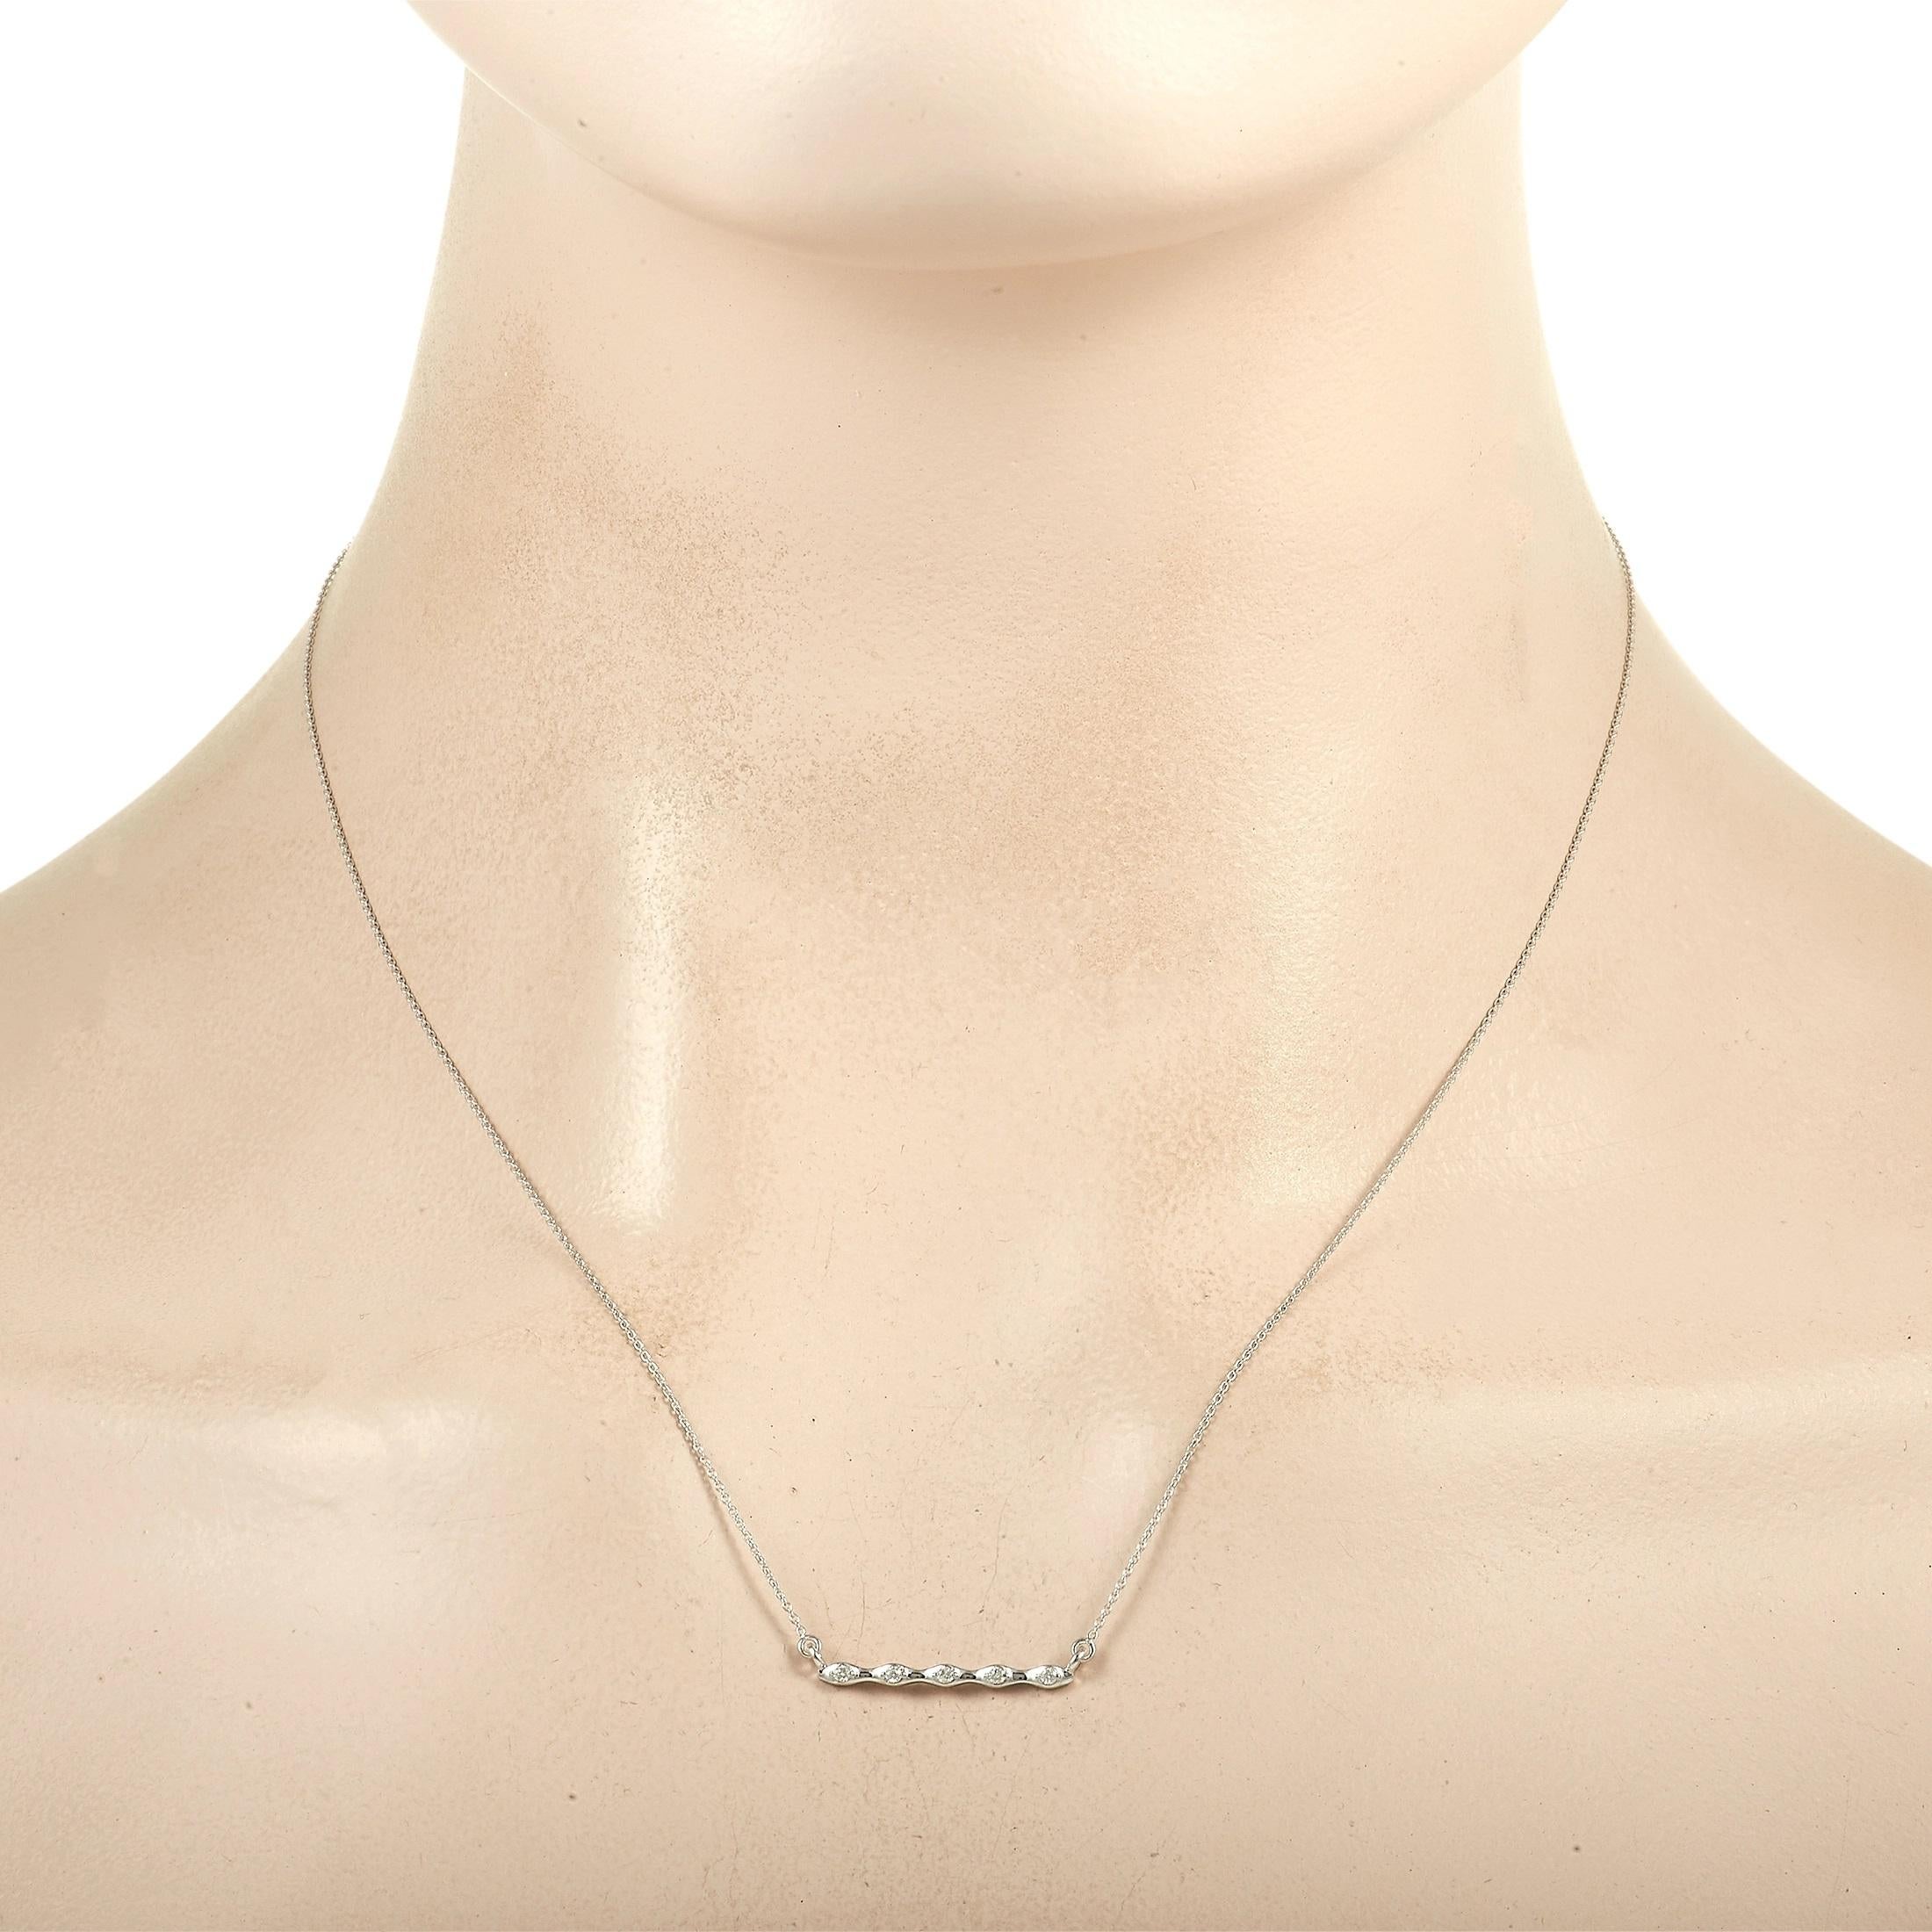 This classy LB Exclusive 14K White Gold 0.06 ct Diamond Necklace adds the perfect touch of sparkle. The necklace is made with a white gold chain, highlighting a matching 14K white gold bar pendant. The bar is set with a row of five round-cut